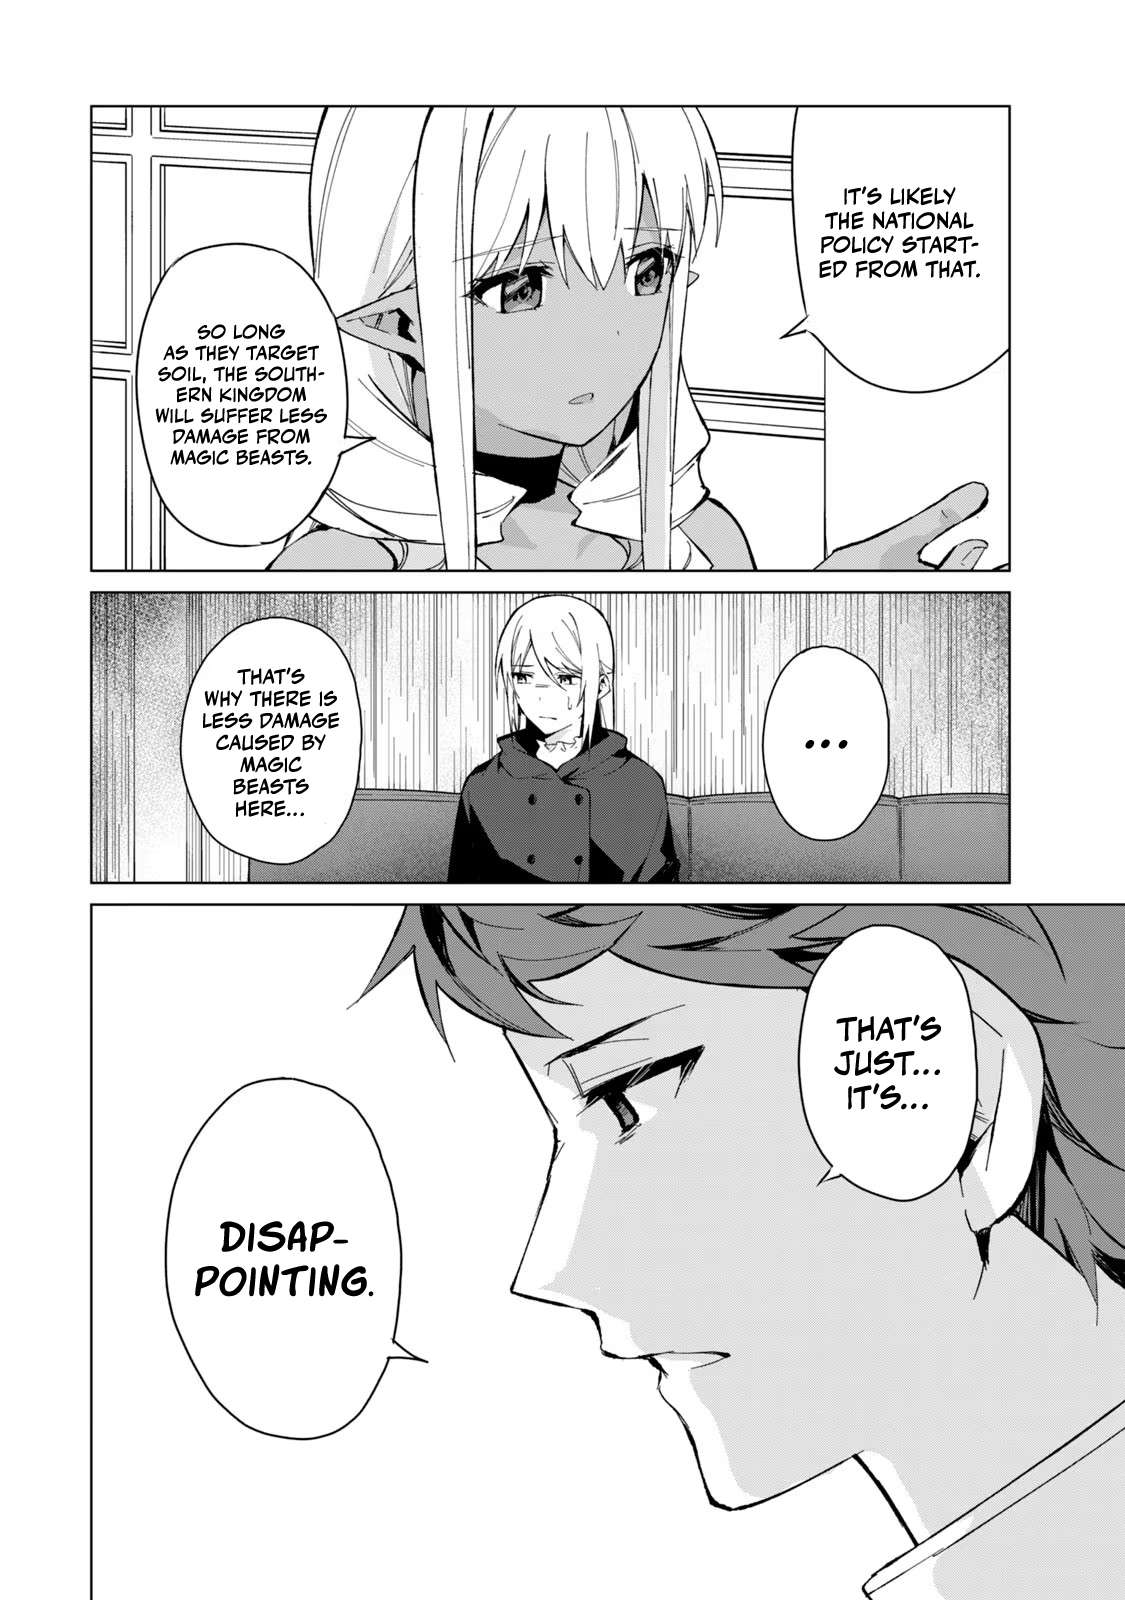 A Story About a Hero Exterminating a Dragon-Class Beautiful Girl Demon King, Who Has Very Low Self-Esteem, With Love! - chapter 21 - #3